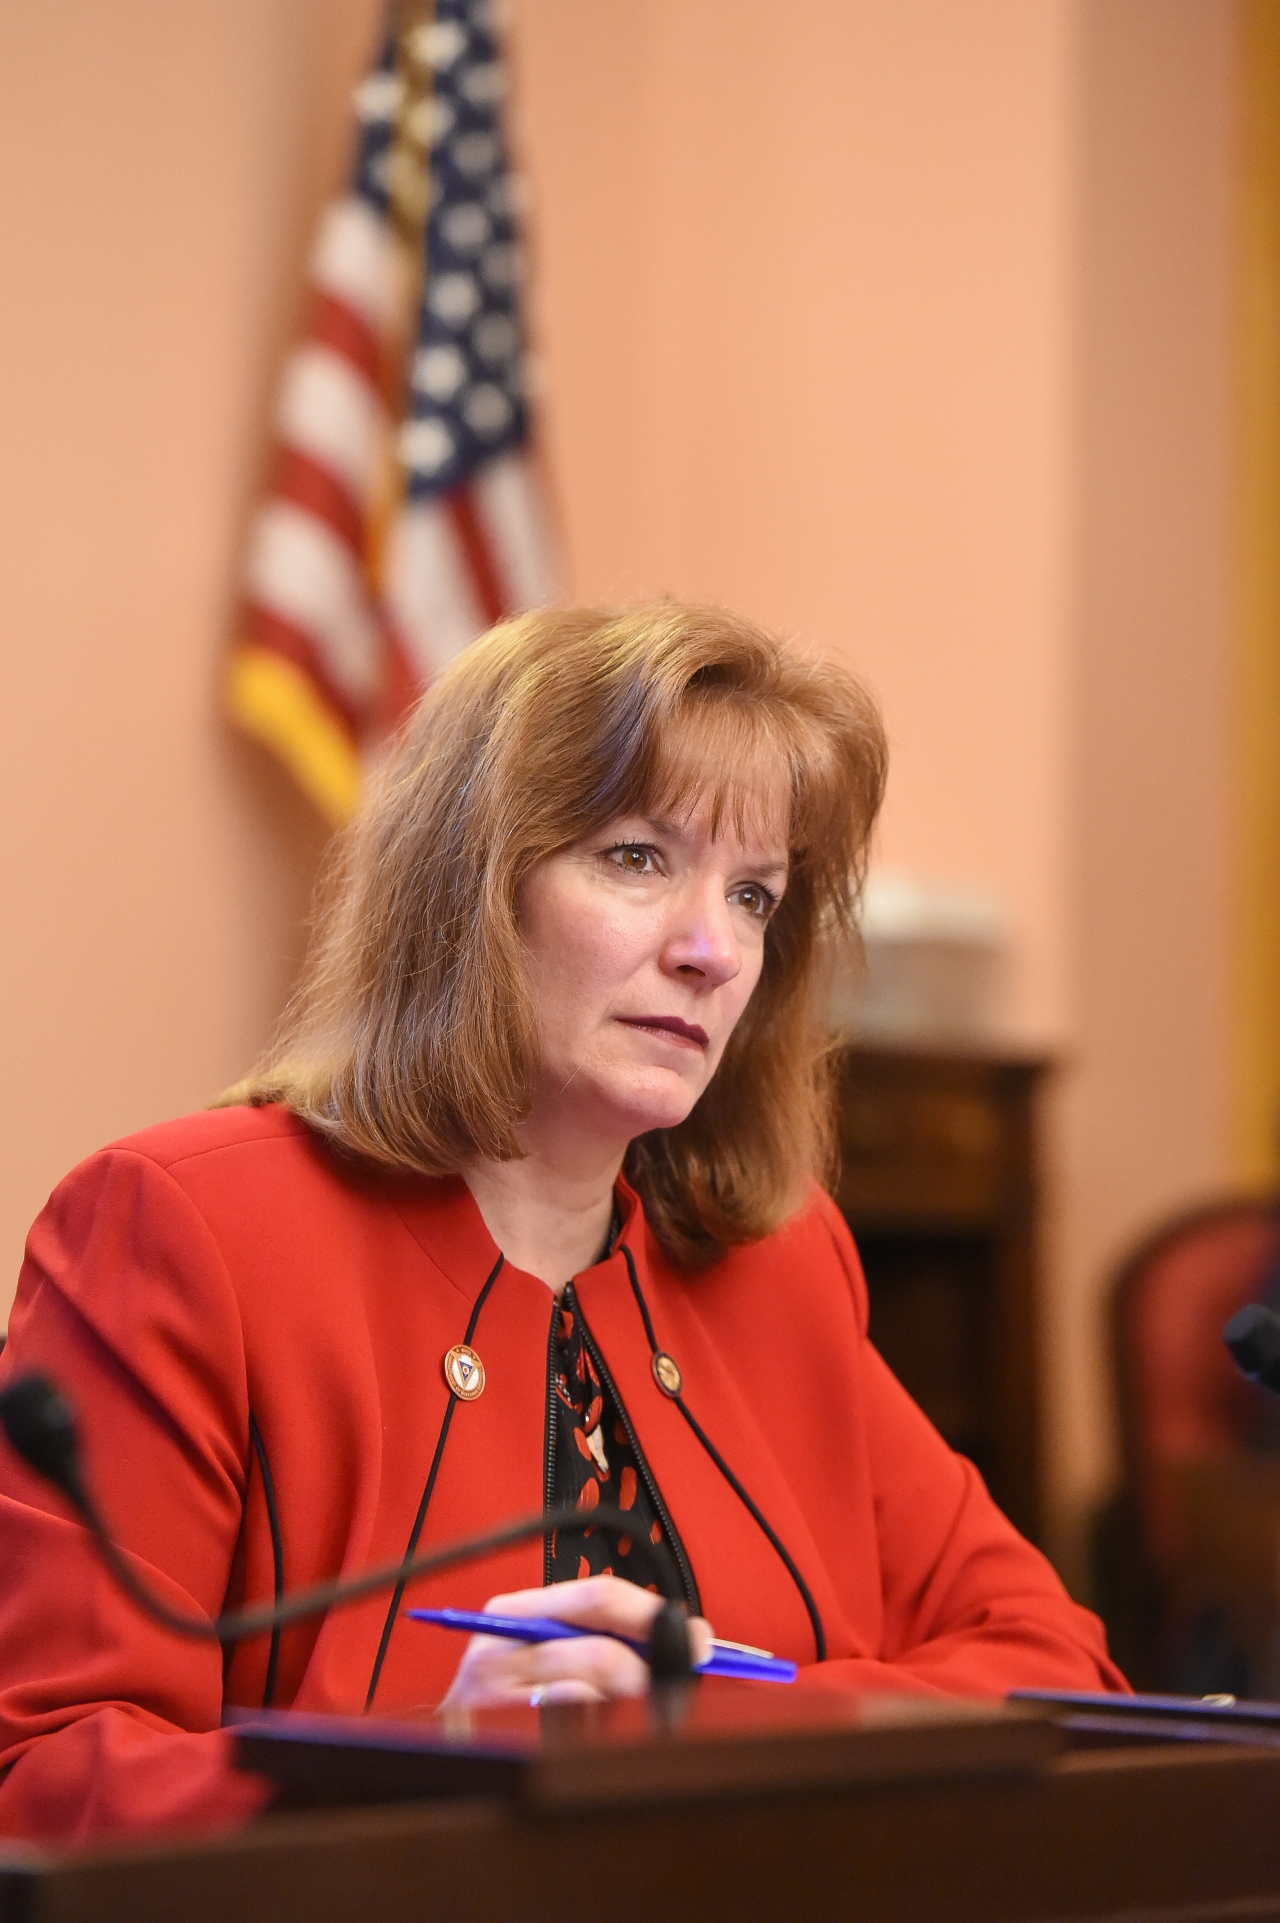 Testimony Given in Support of Suicide Education Bills